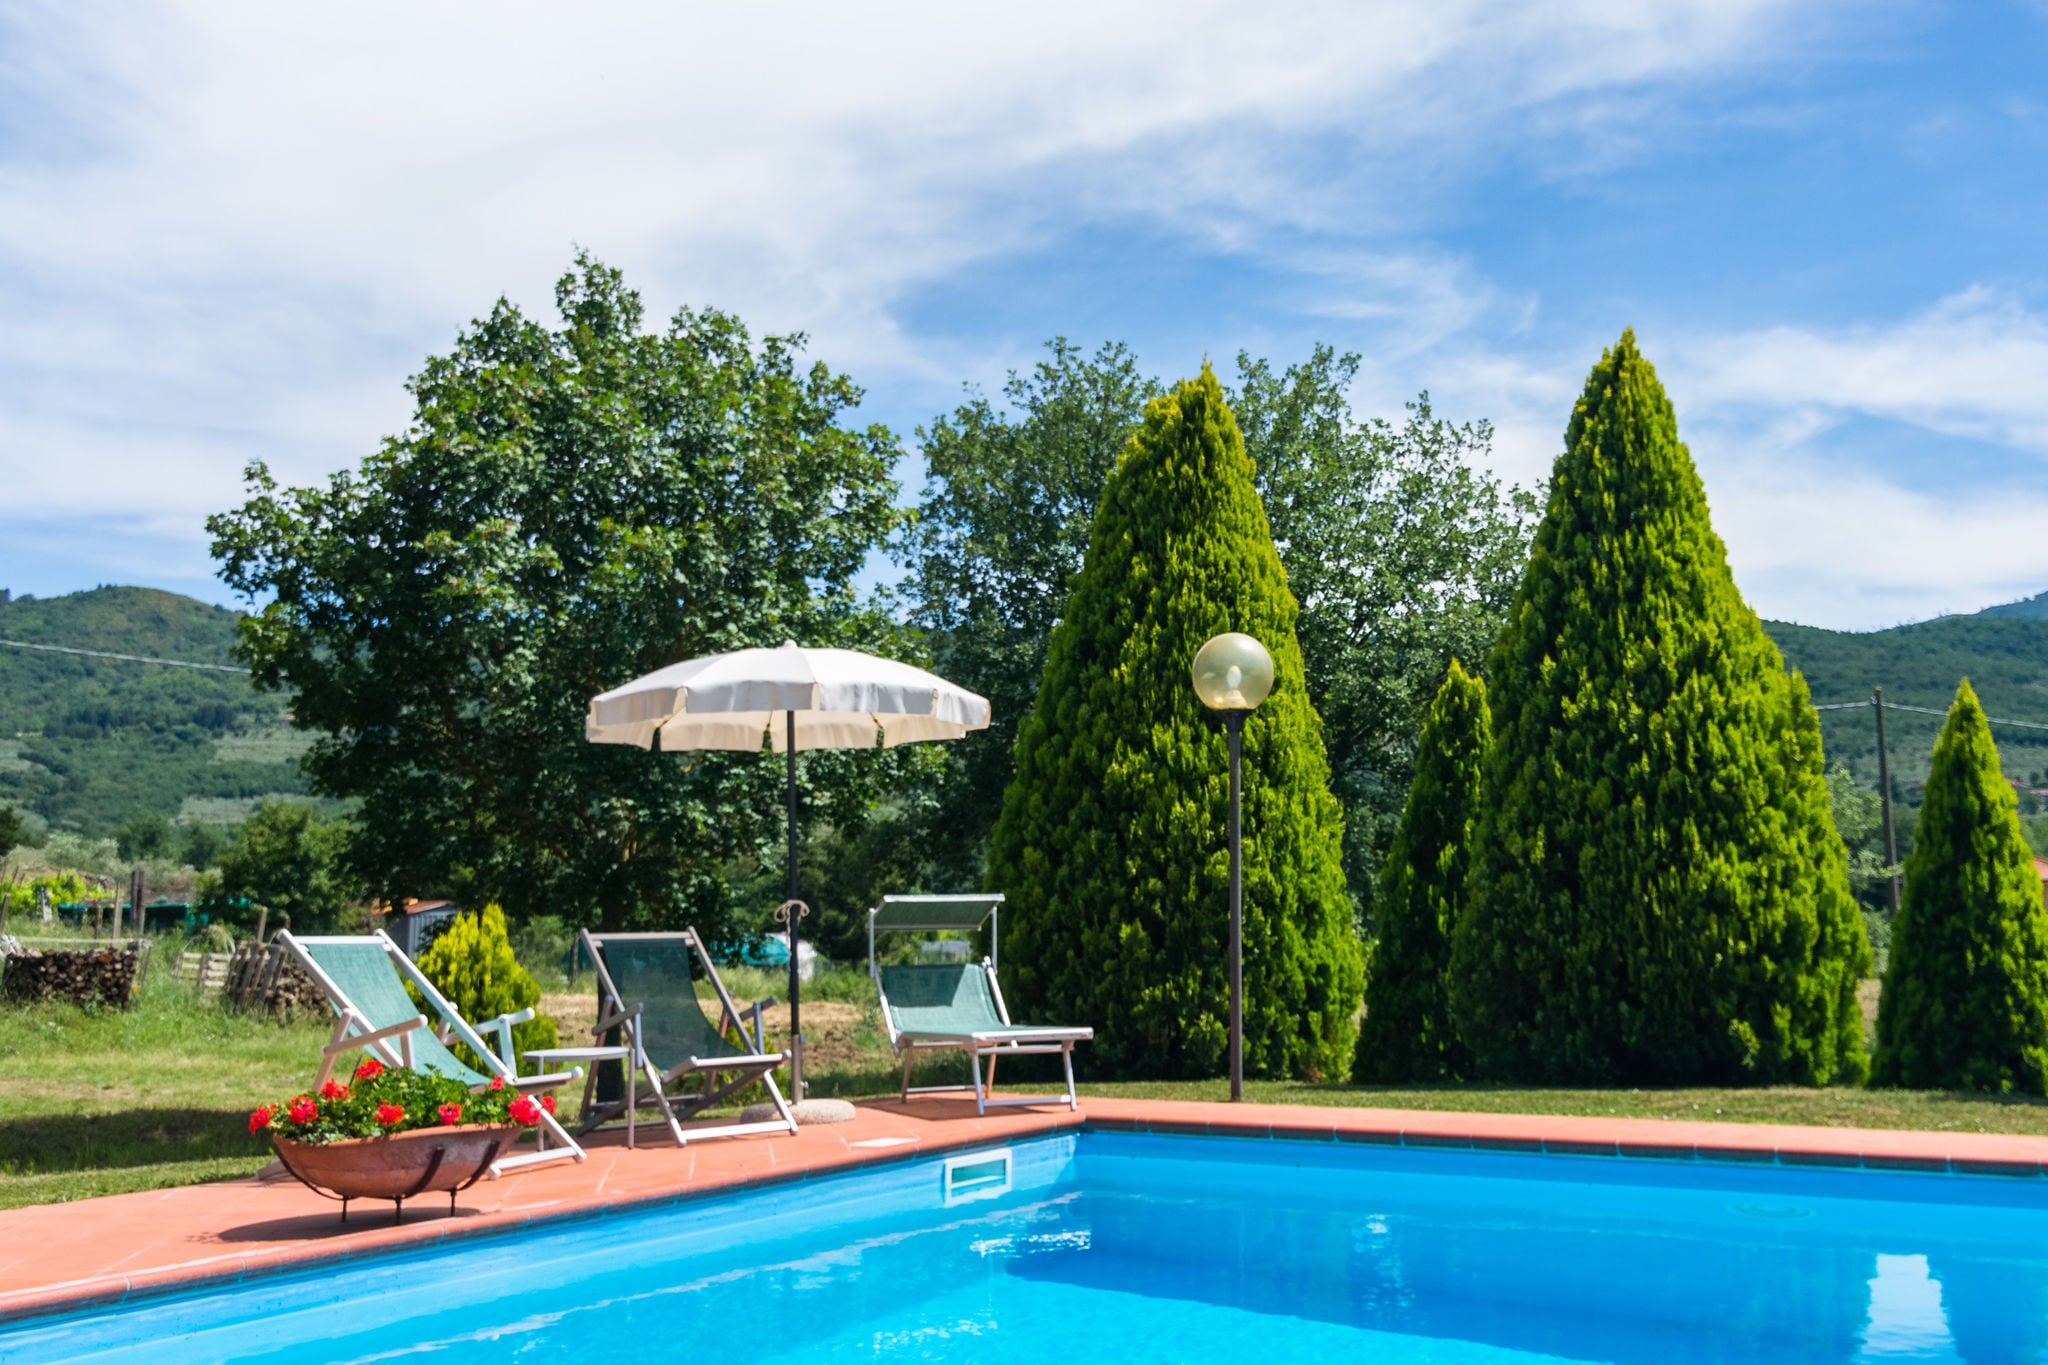 Agriturismo with garden, private terrace, panoramic pool, organic wine